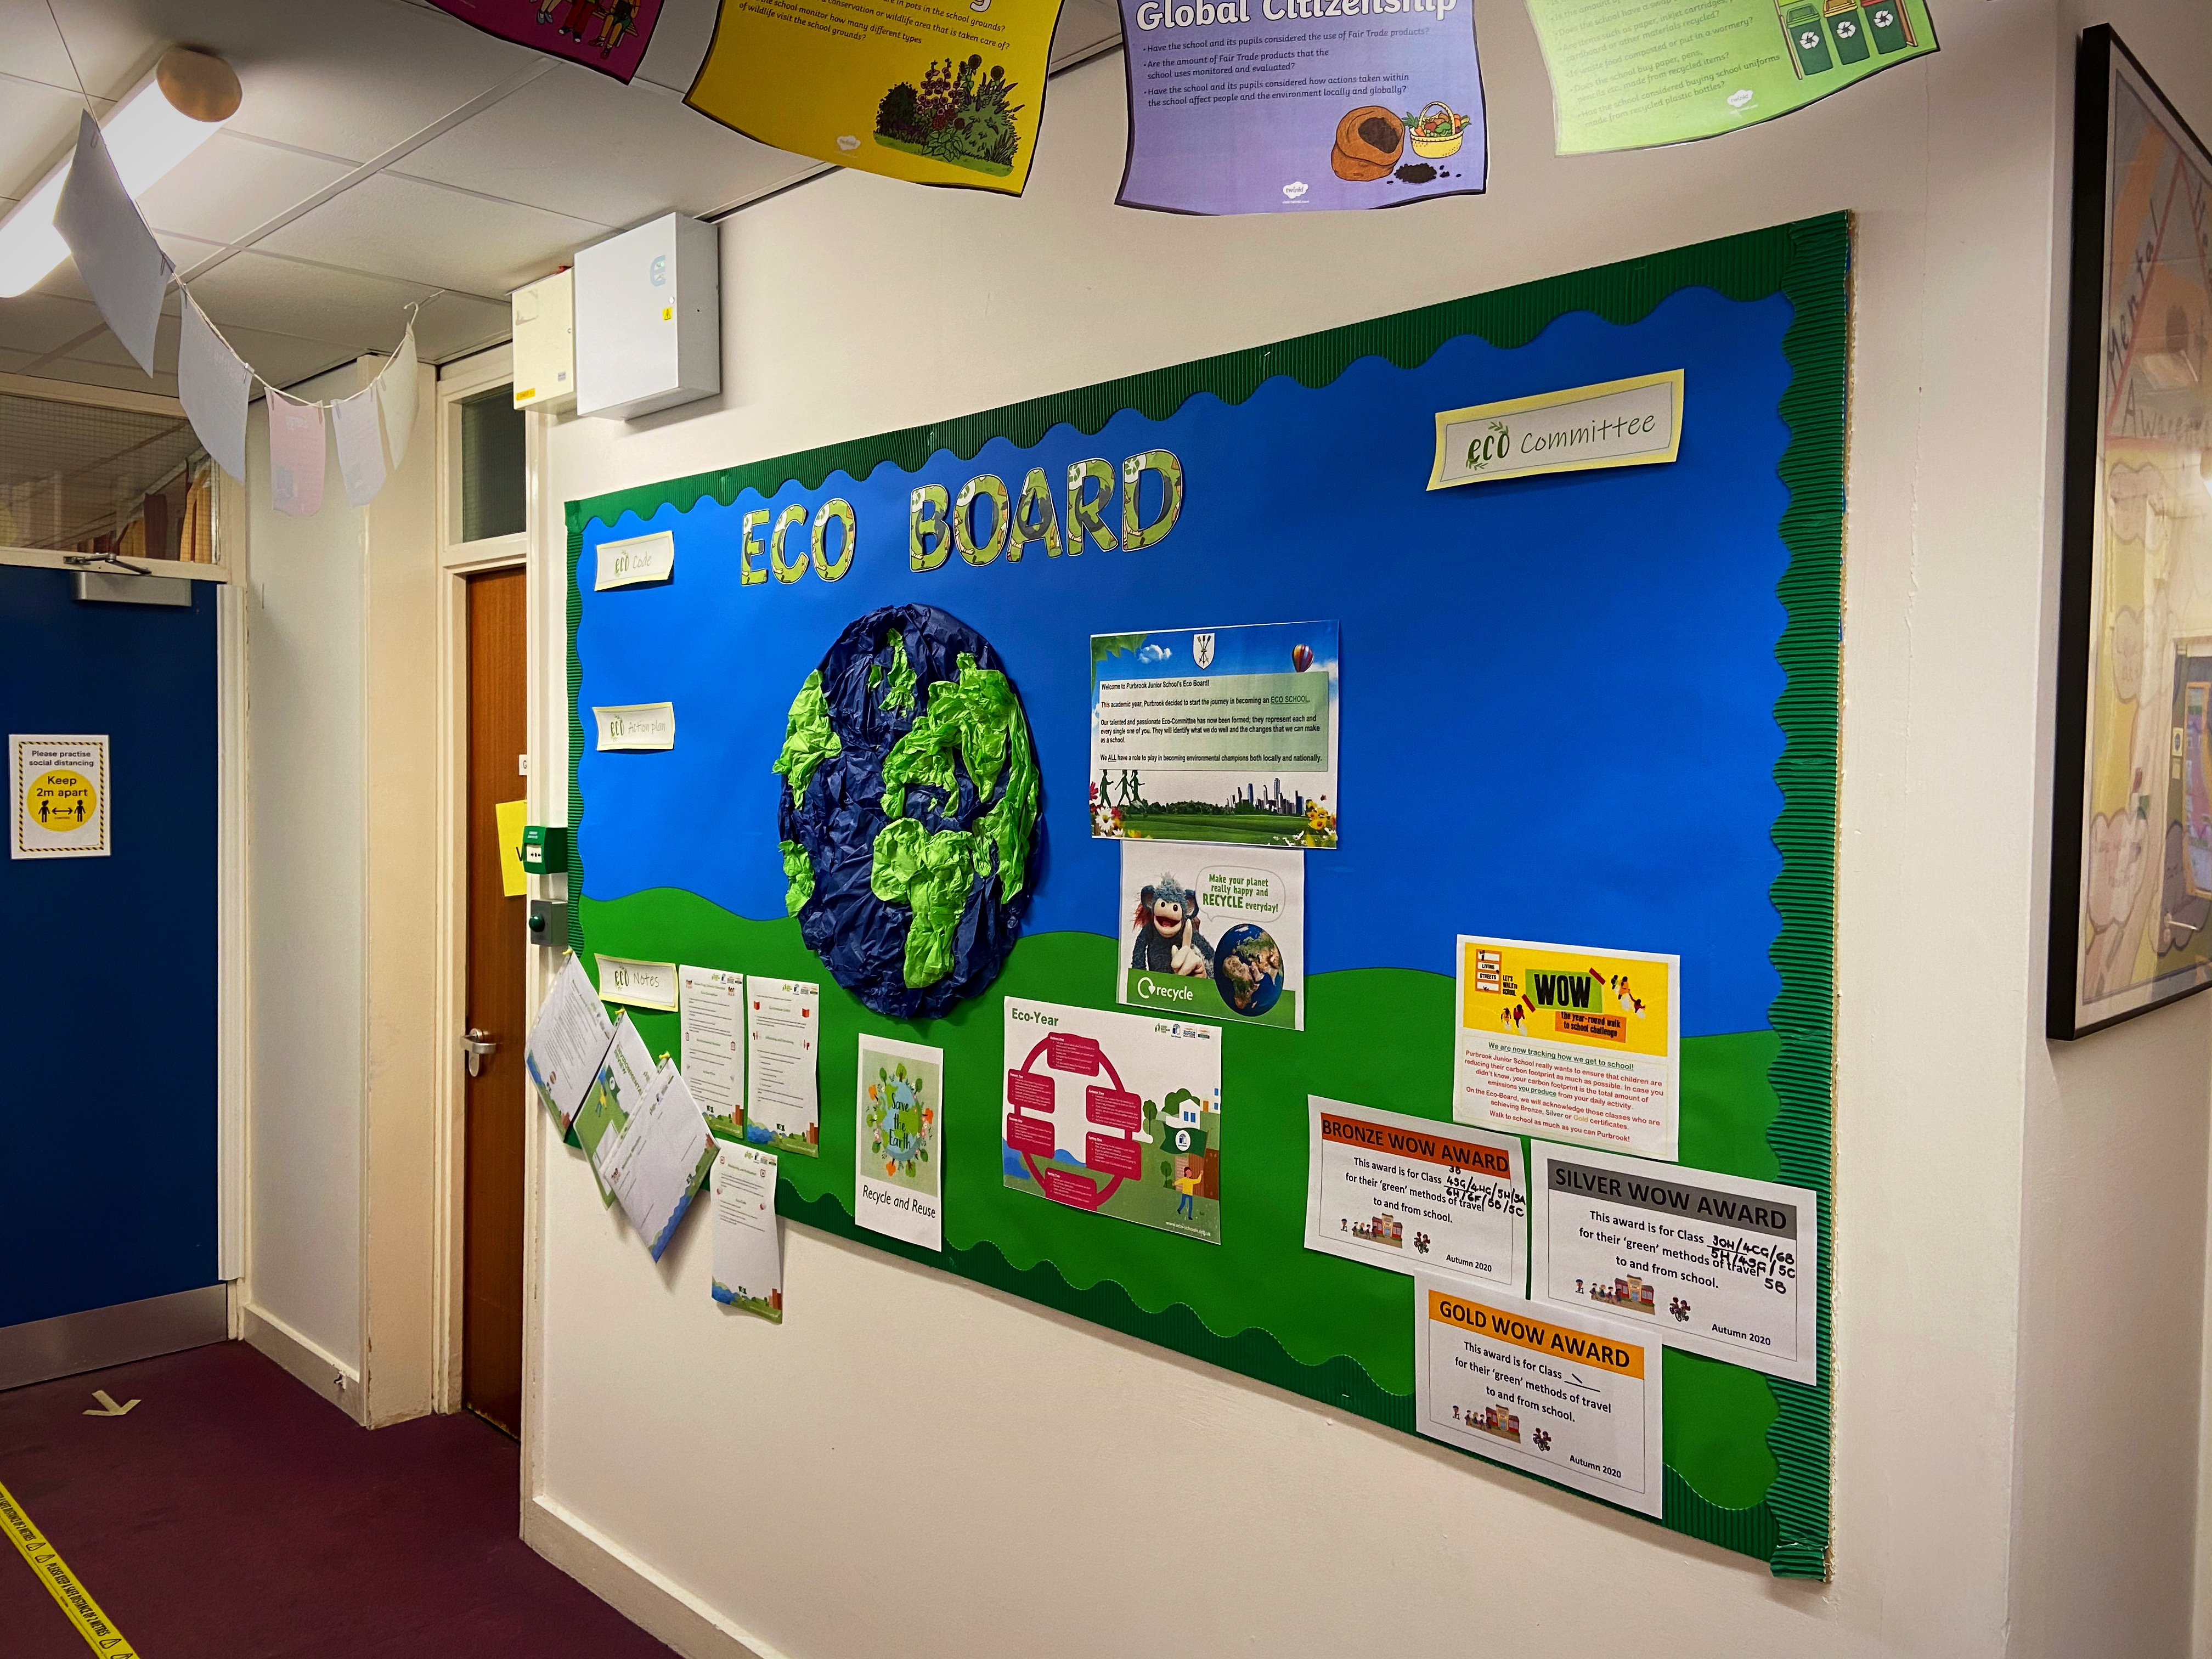 An Eco-Board has been created to display all things environment related.